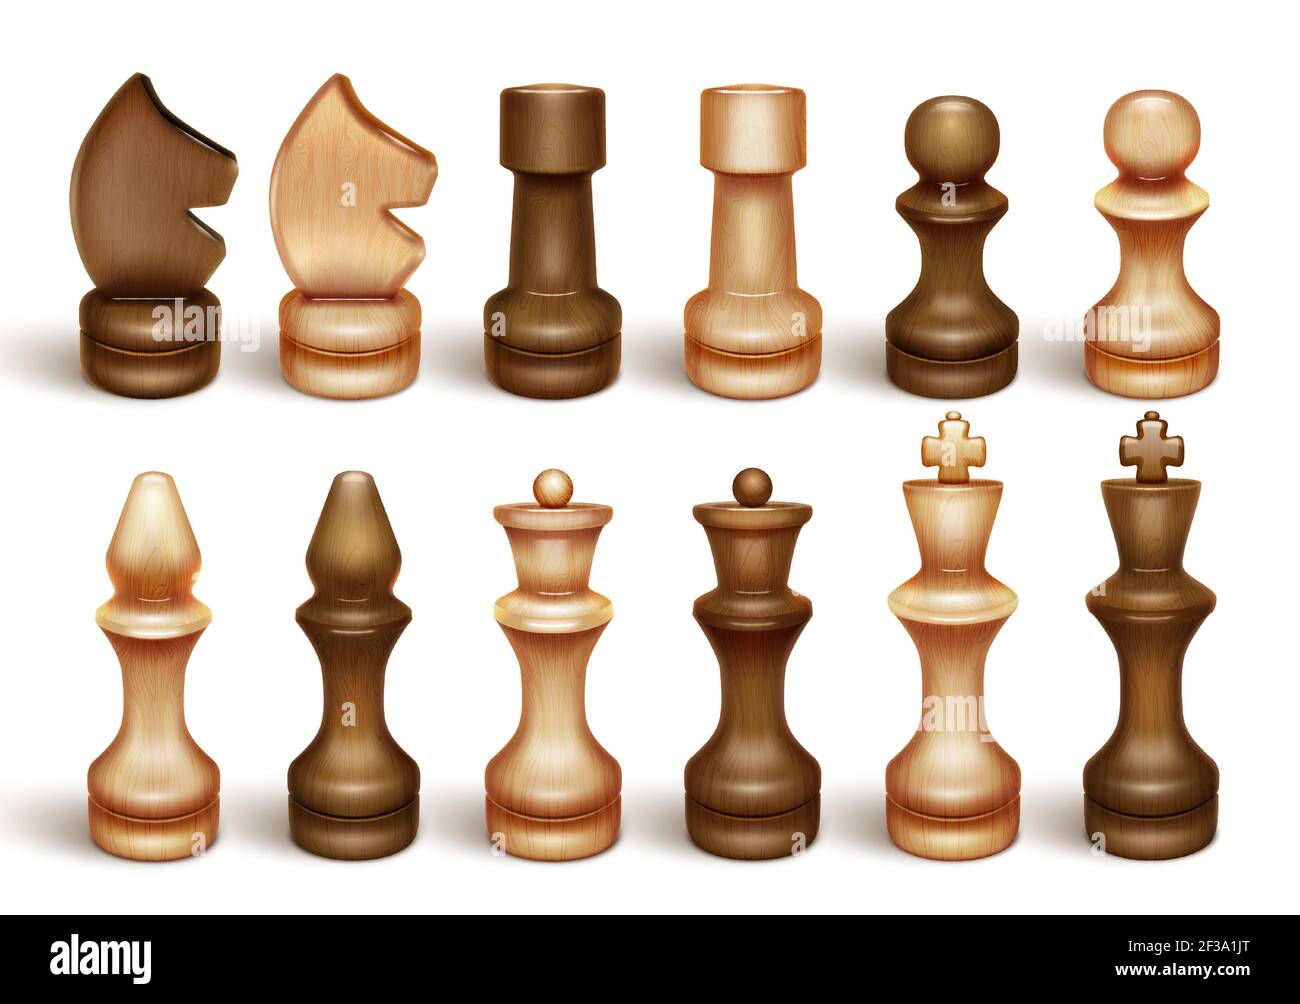 Chessmen. Chess is a board game and sport. King, queen, knight, rook, knight, bishop, pawn. 3D realistic illustration. Isolated on a white background Stock Vector